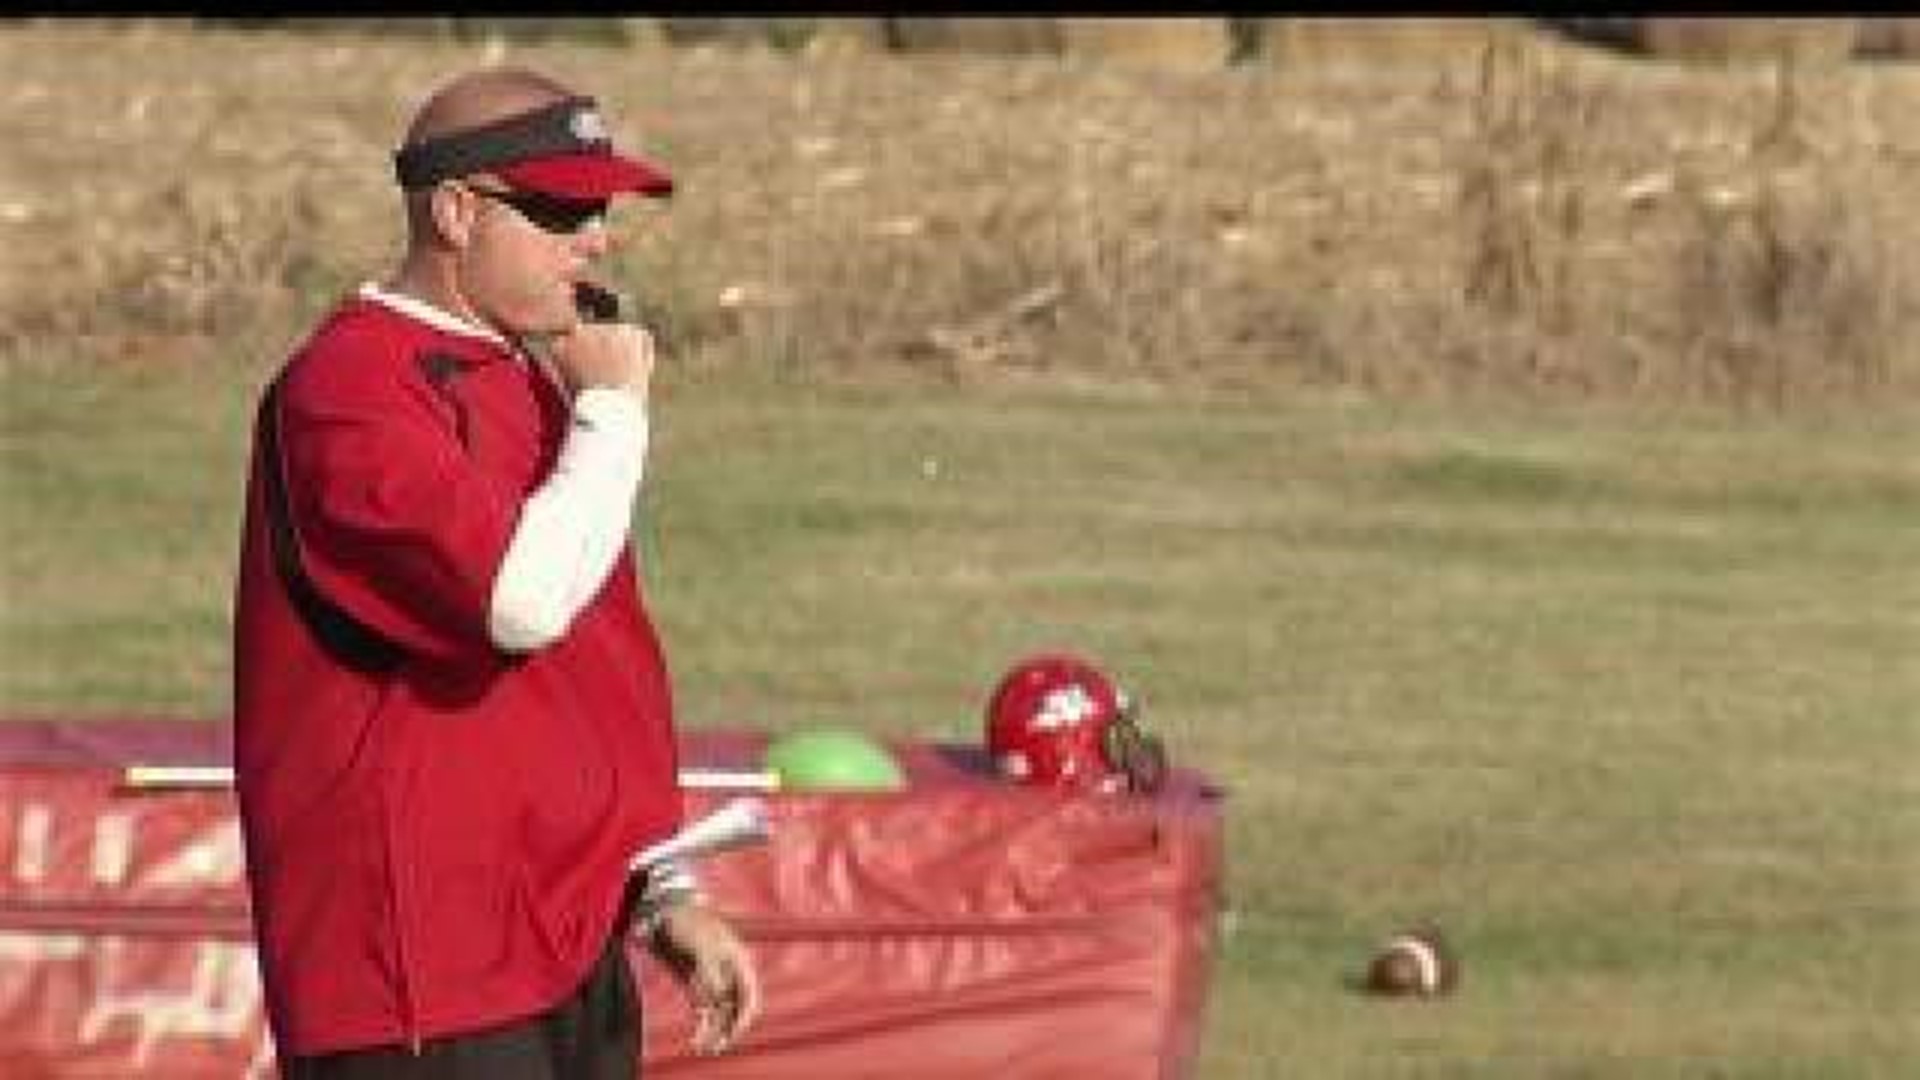 Coach leads team with experience as athlete in mind